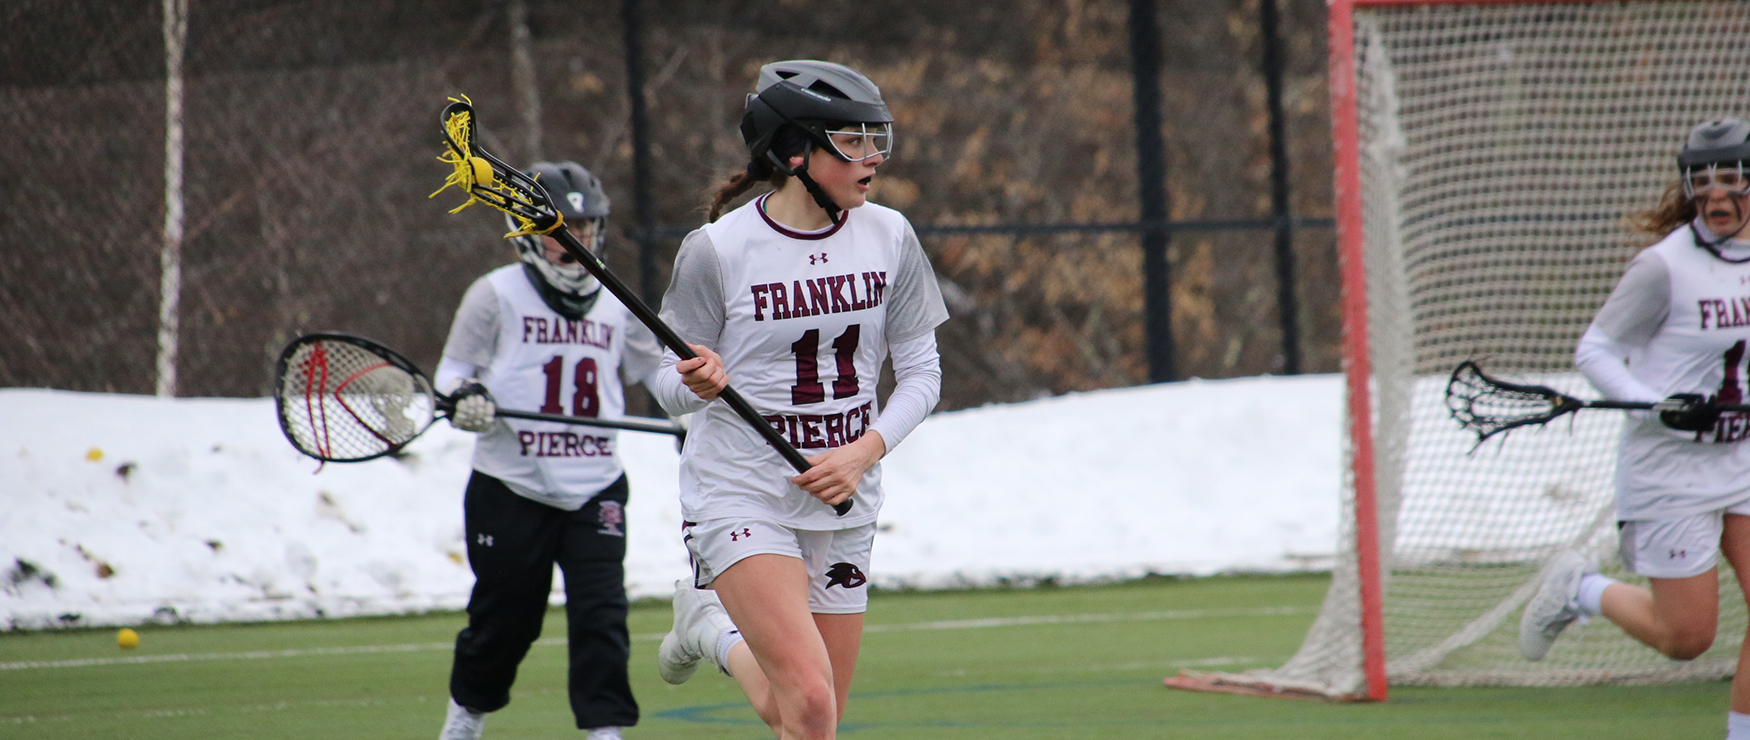 Women’s Lacrosse Clipped in Barnburner at No. 7 New Haven, 21-19